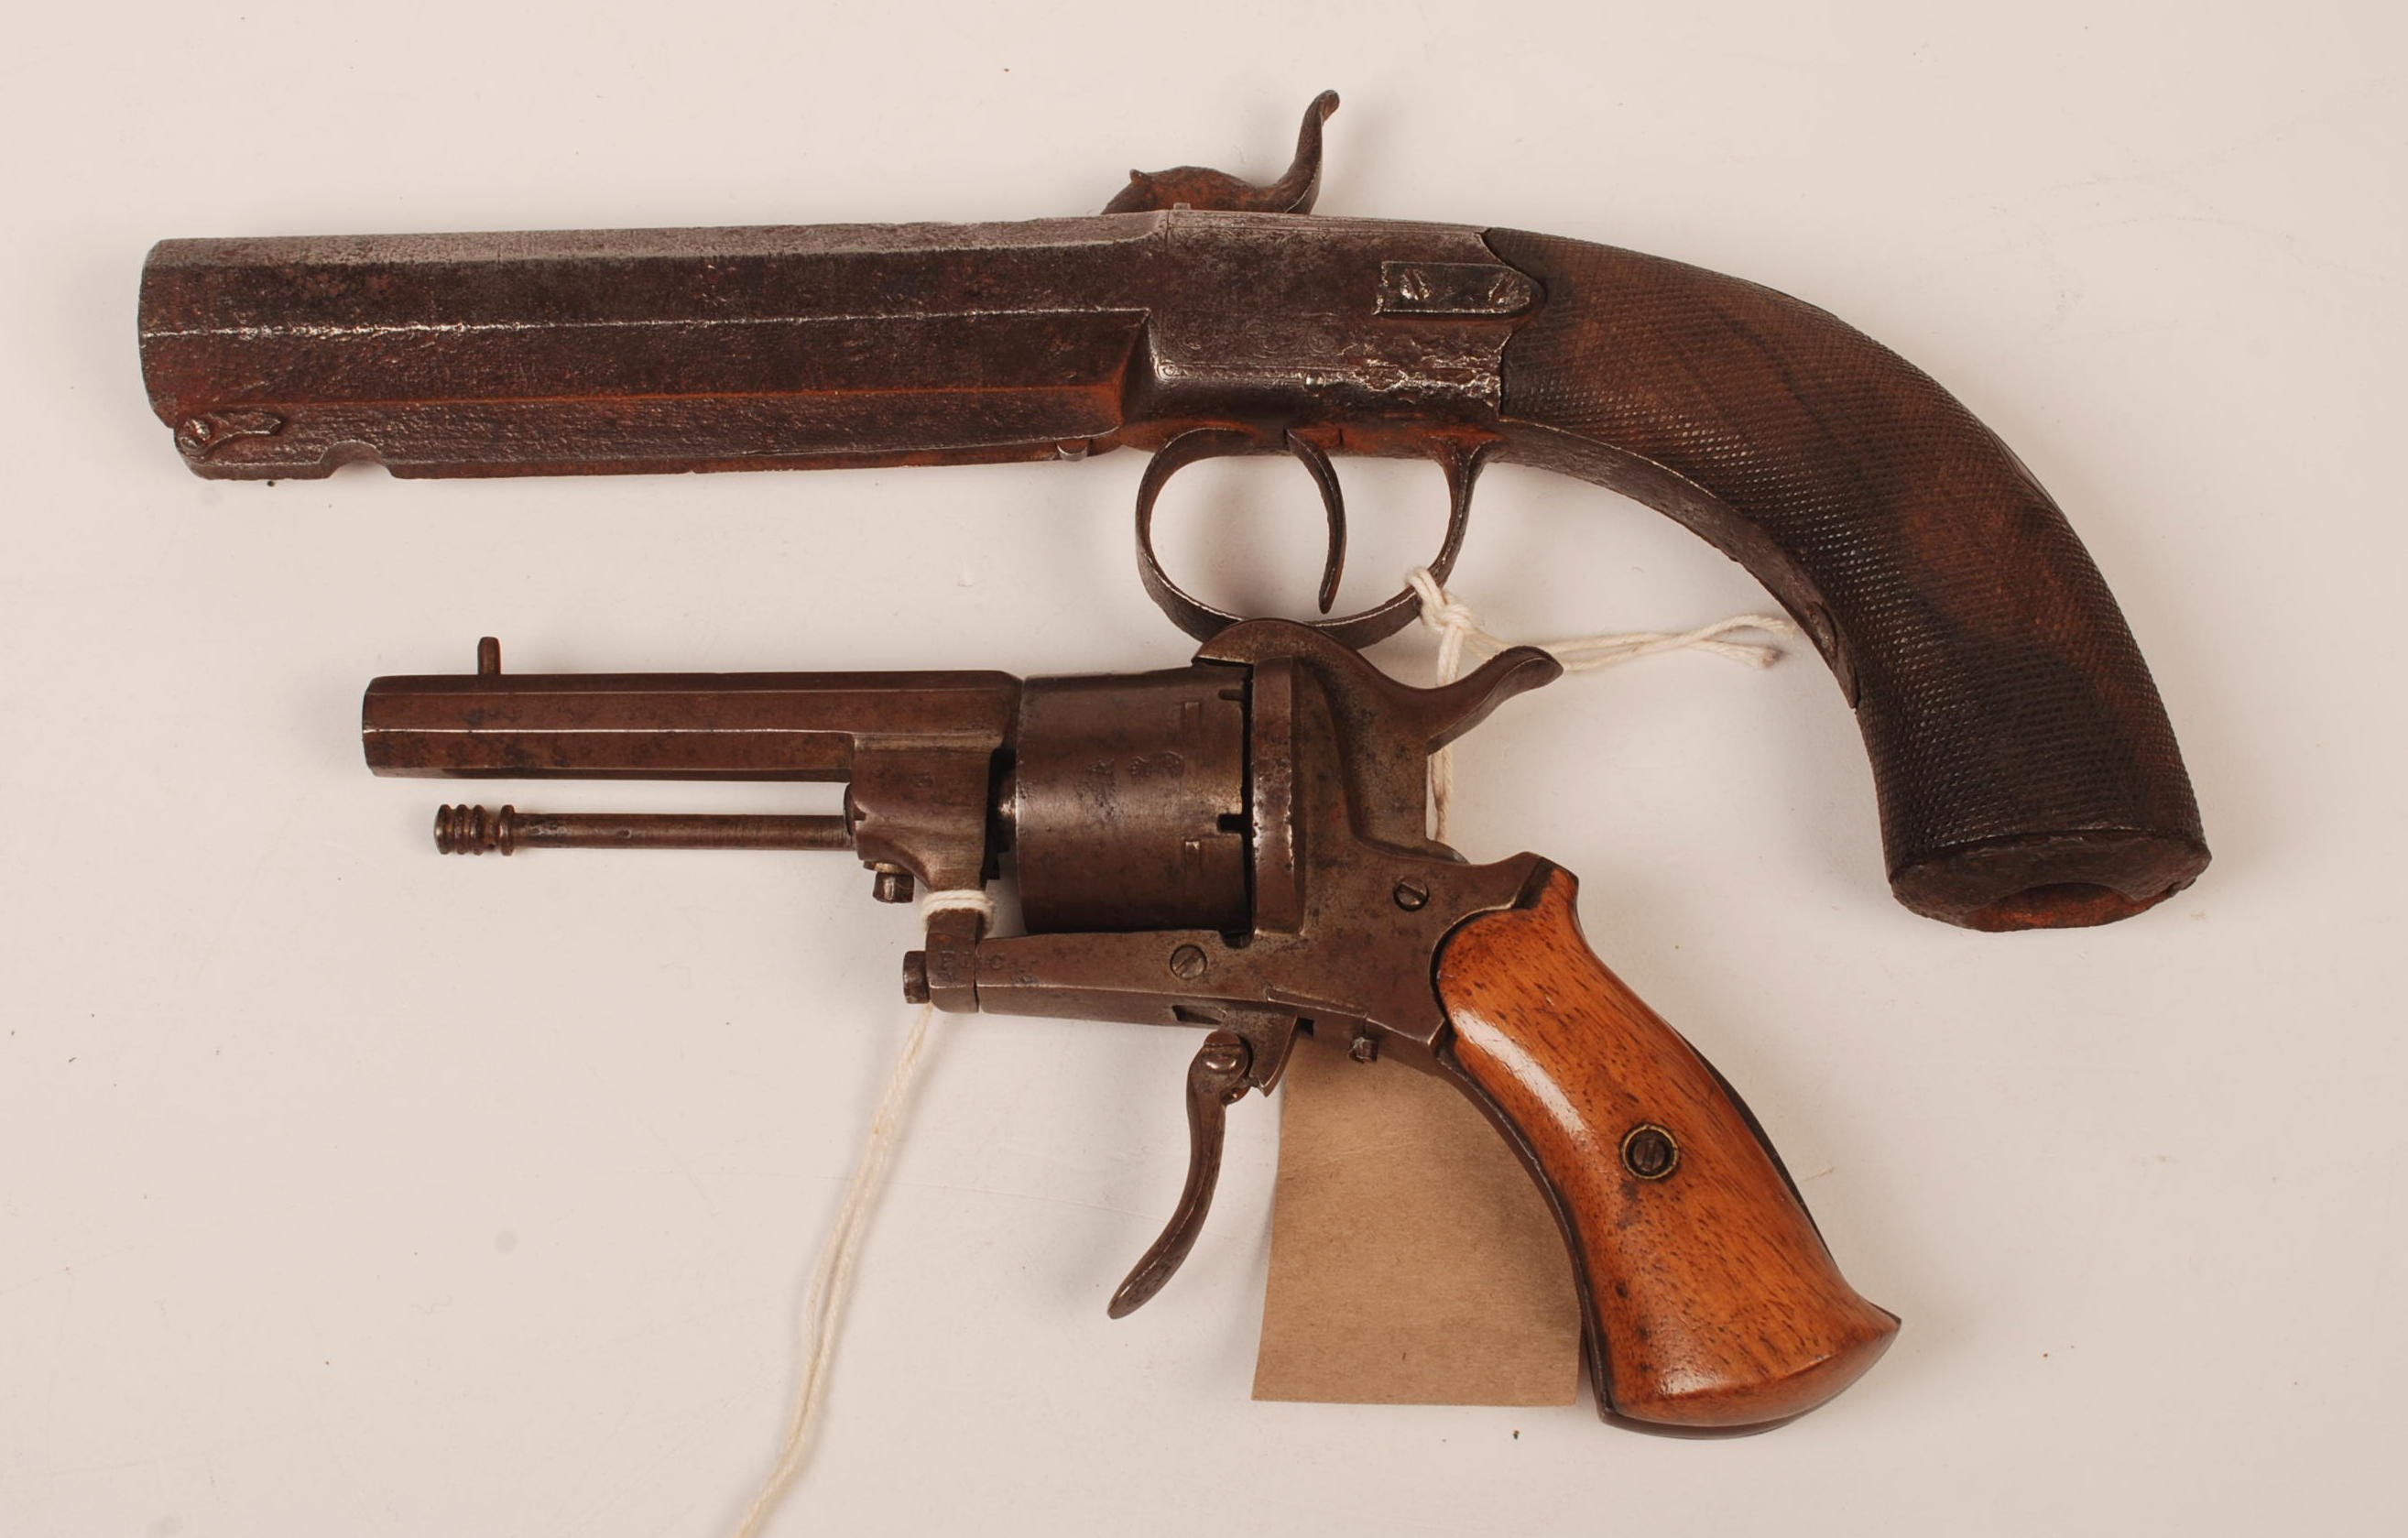 A 19th century percussion cap pistol with an octagonal barrel and hatched walnut grip, originally